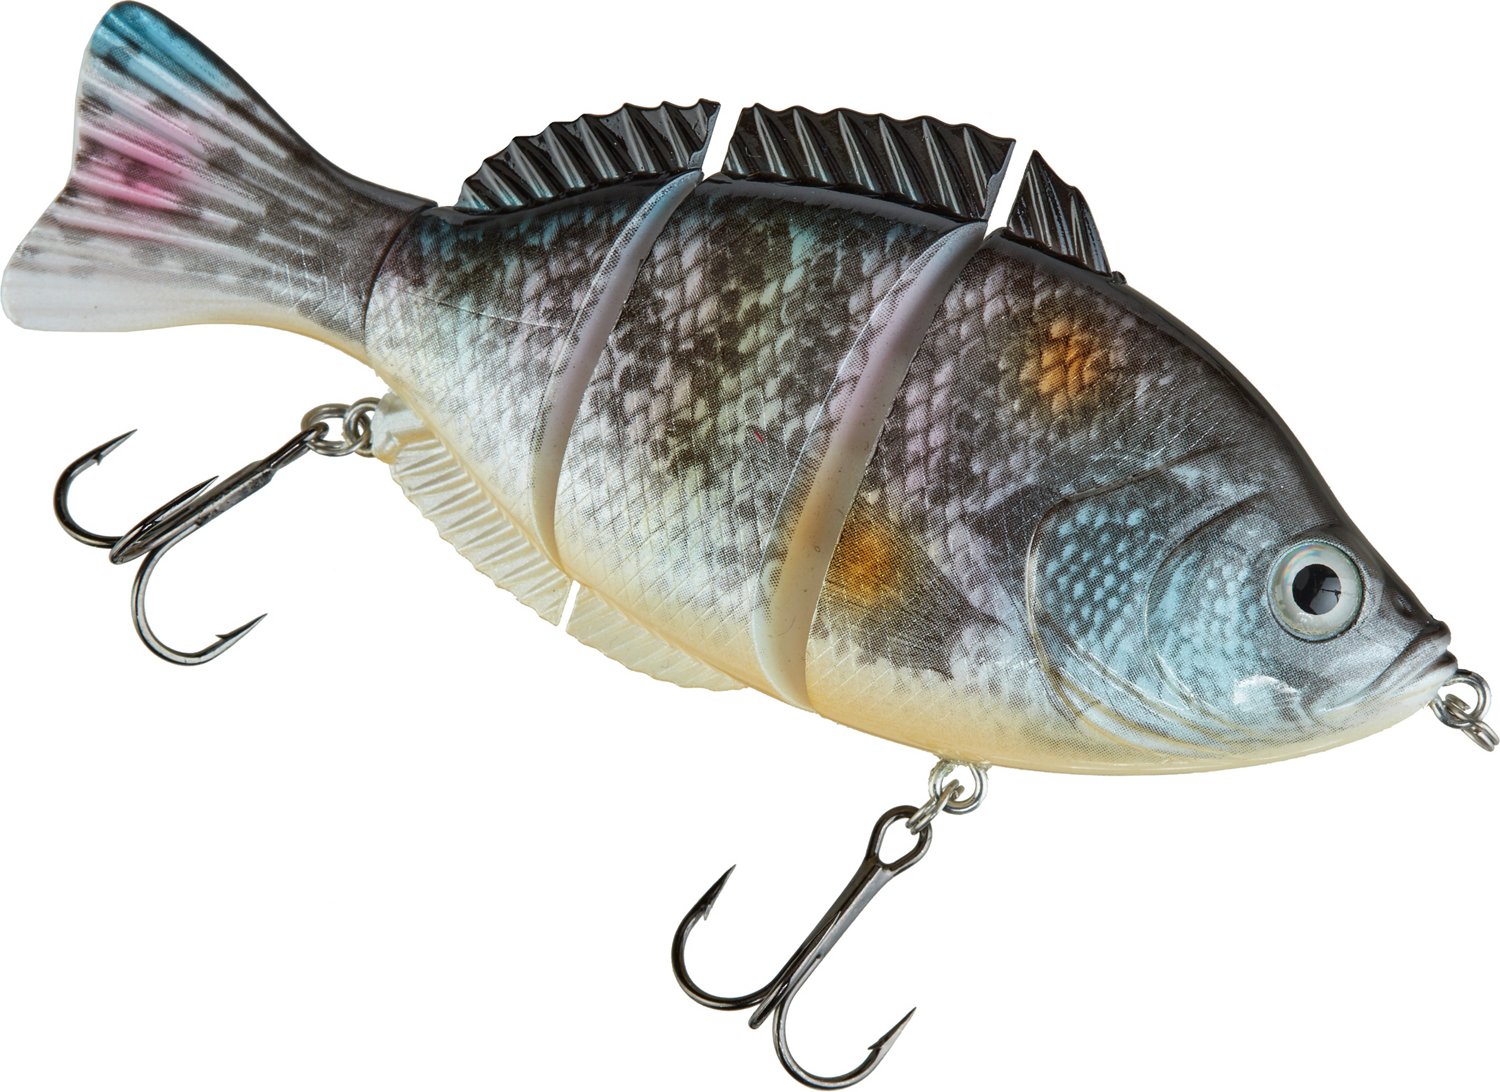 H2O XPRESS 4-1/2 in Jointed Sunfish Swim Bait